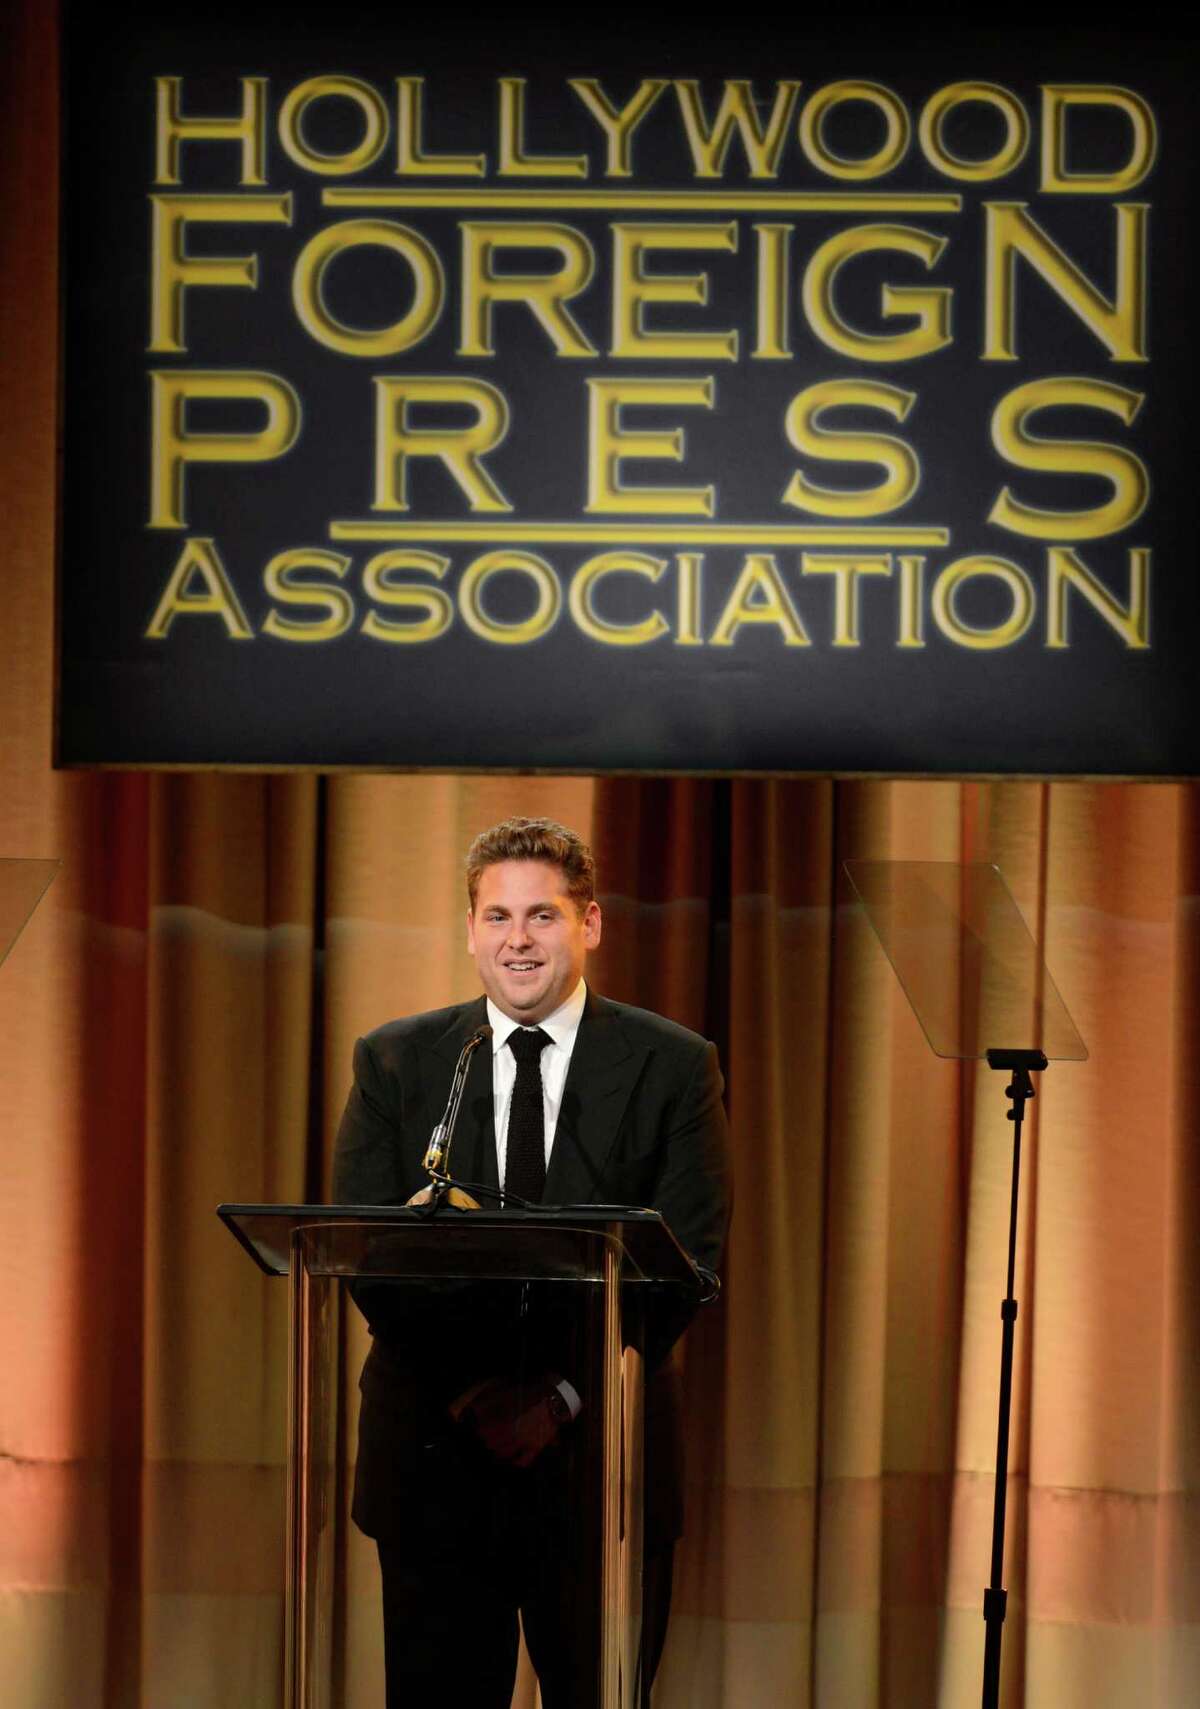 Jonah Hill speaks on stage at the Hollywood Foreign Press Association Luncheon at the Beverly Hilton Hotel on Tuesday, Aug. 13, 2013, in Beverly Hills, Calif. (Photo by Chris Pizzello/Invision/AP) ORG XMIT: CAPM151